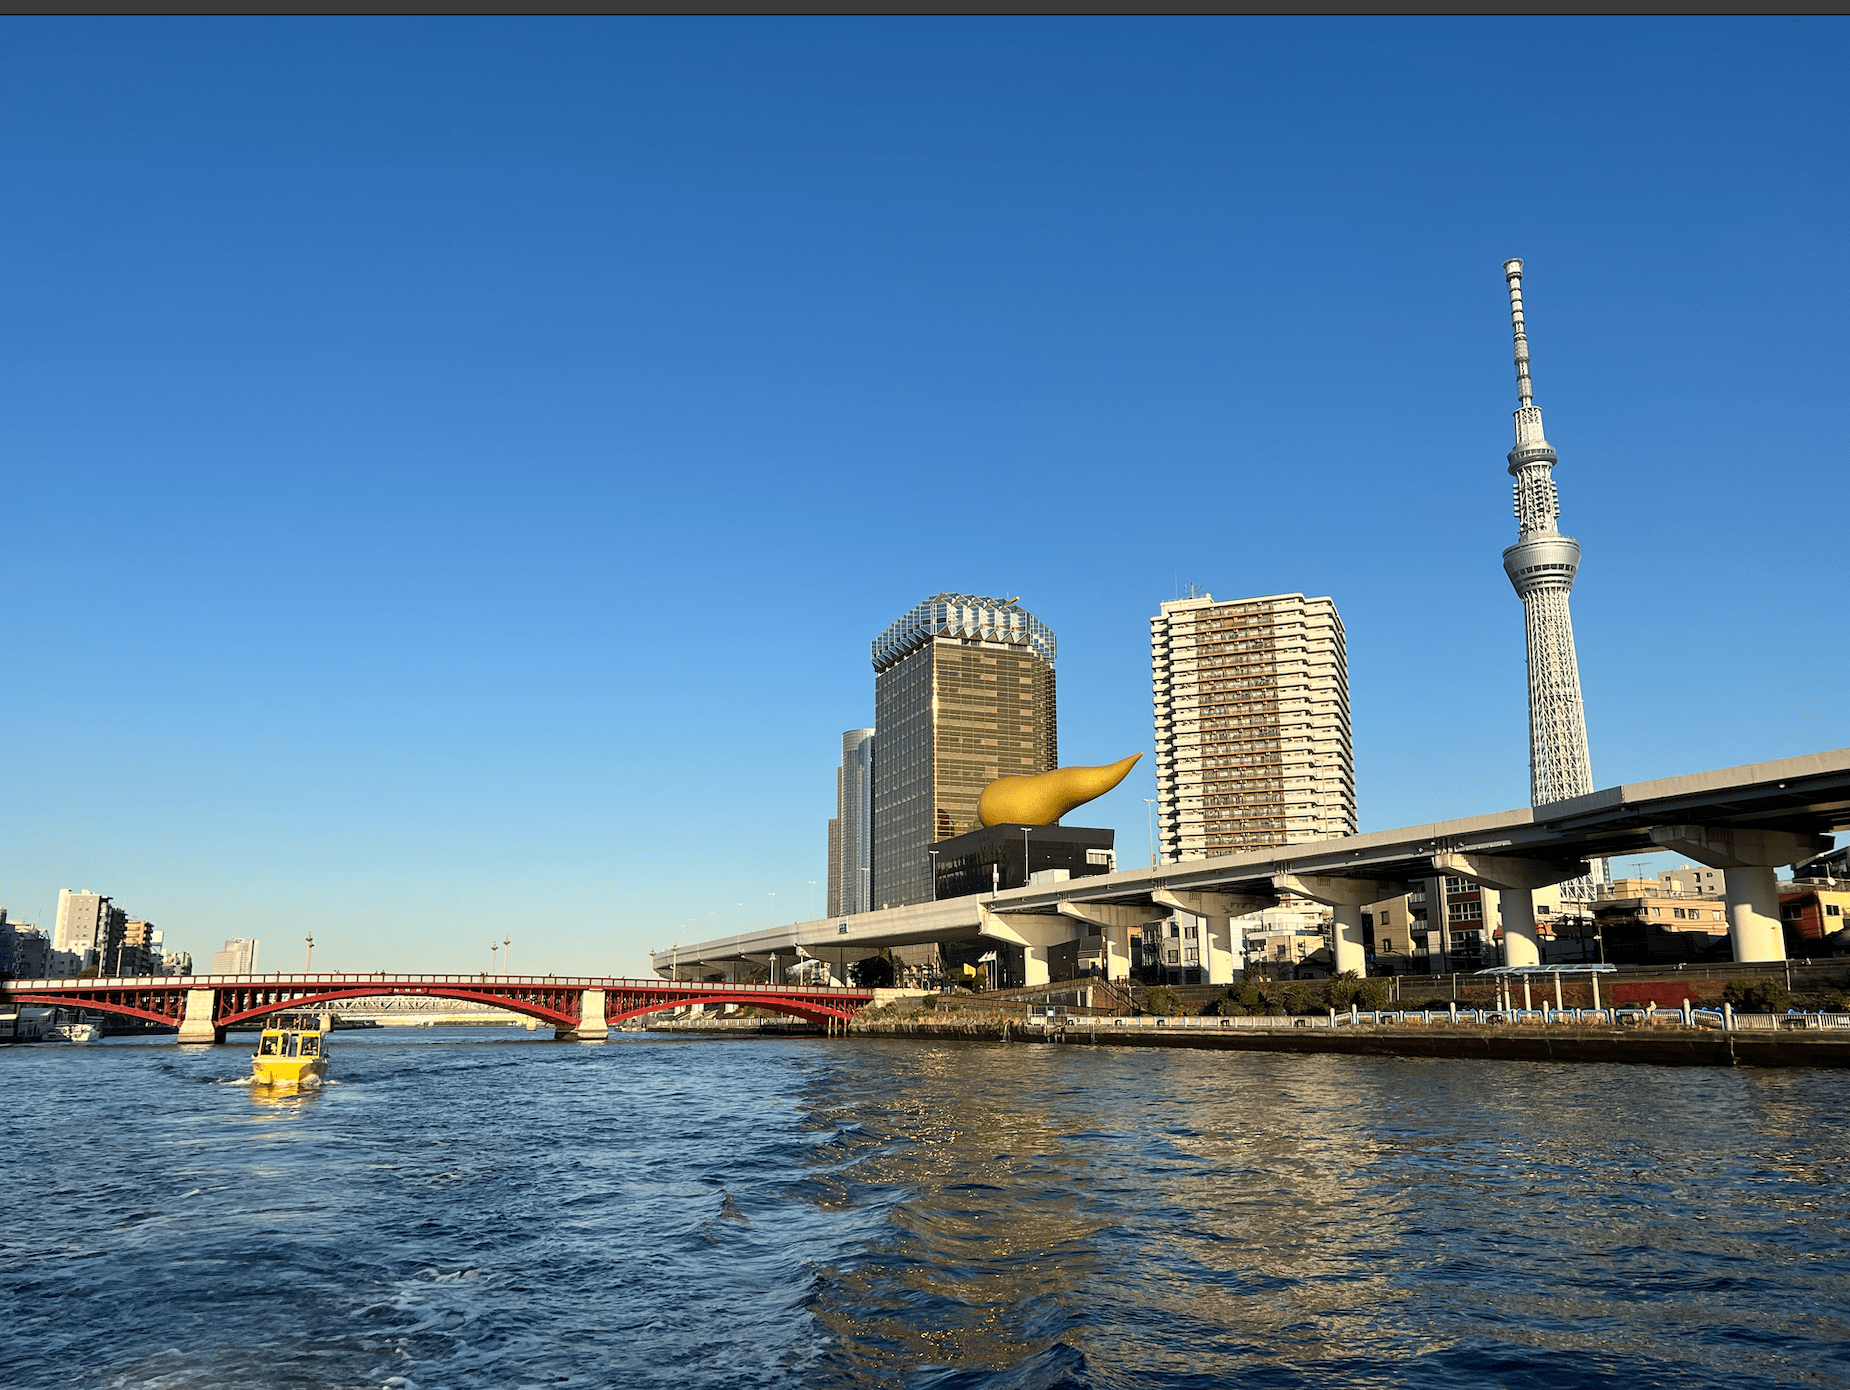 Water Taxi Tokyo